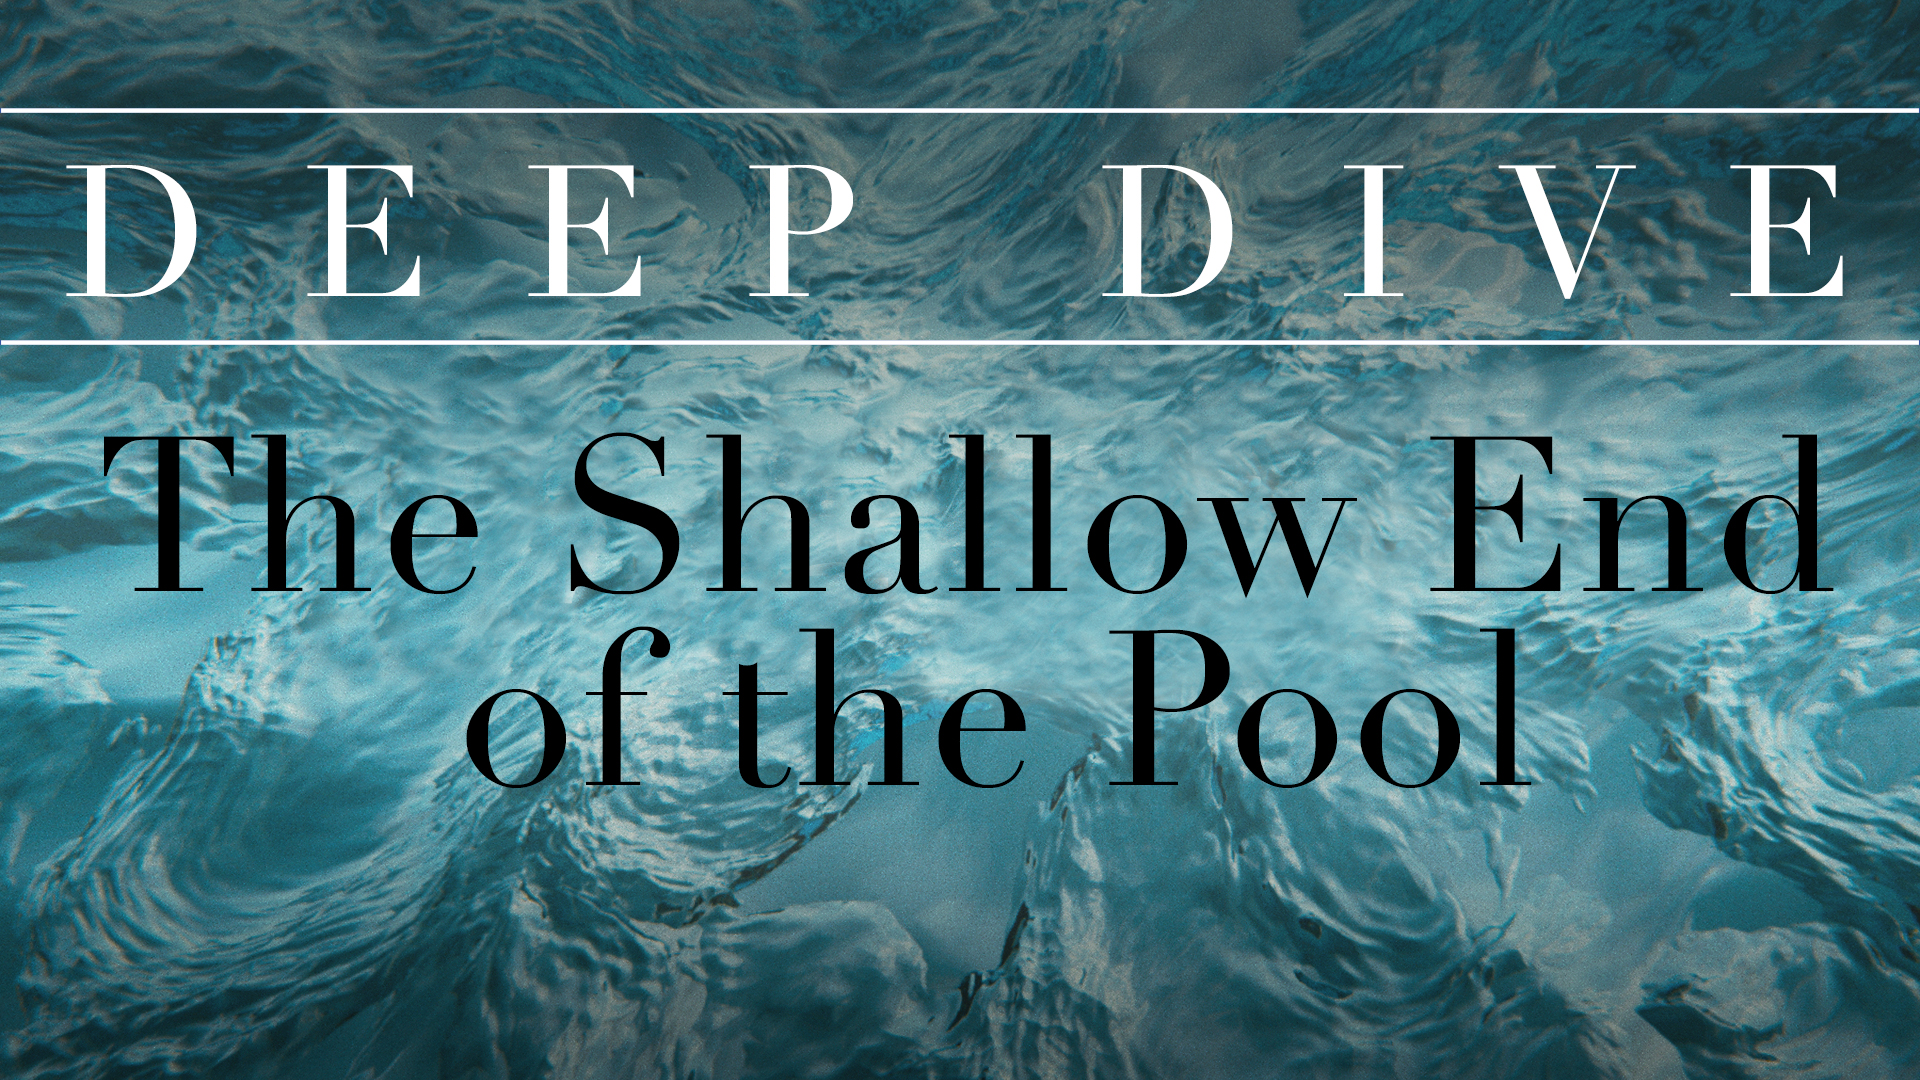 Deep Dive Part 4 "The Shallow End of the Pool" (THRIVE)